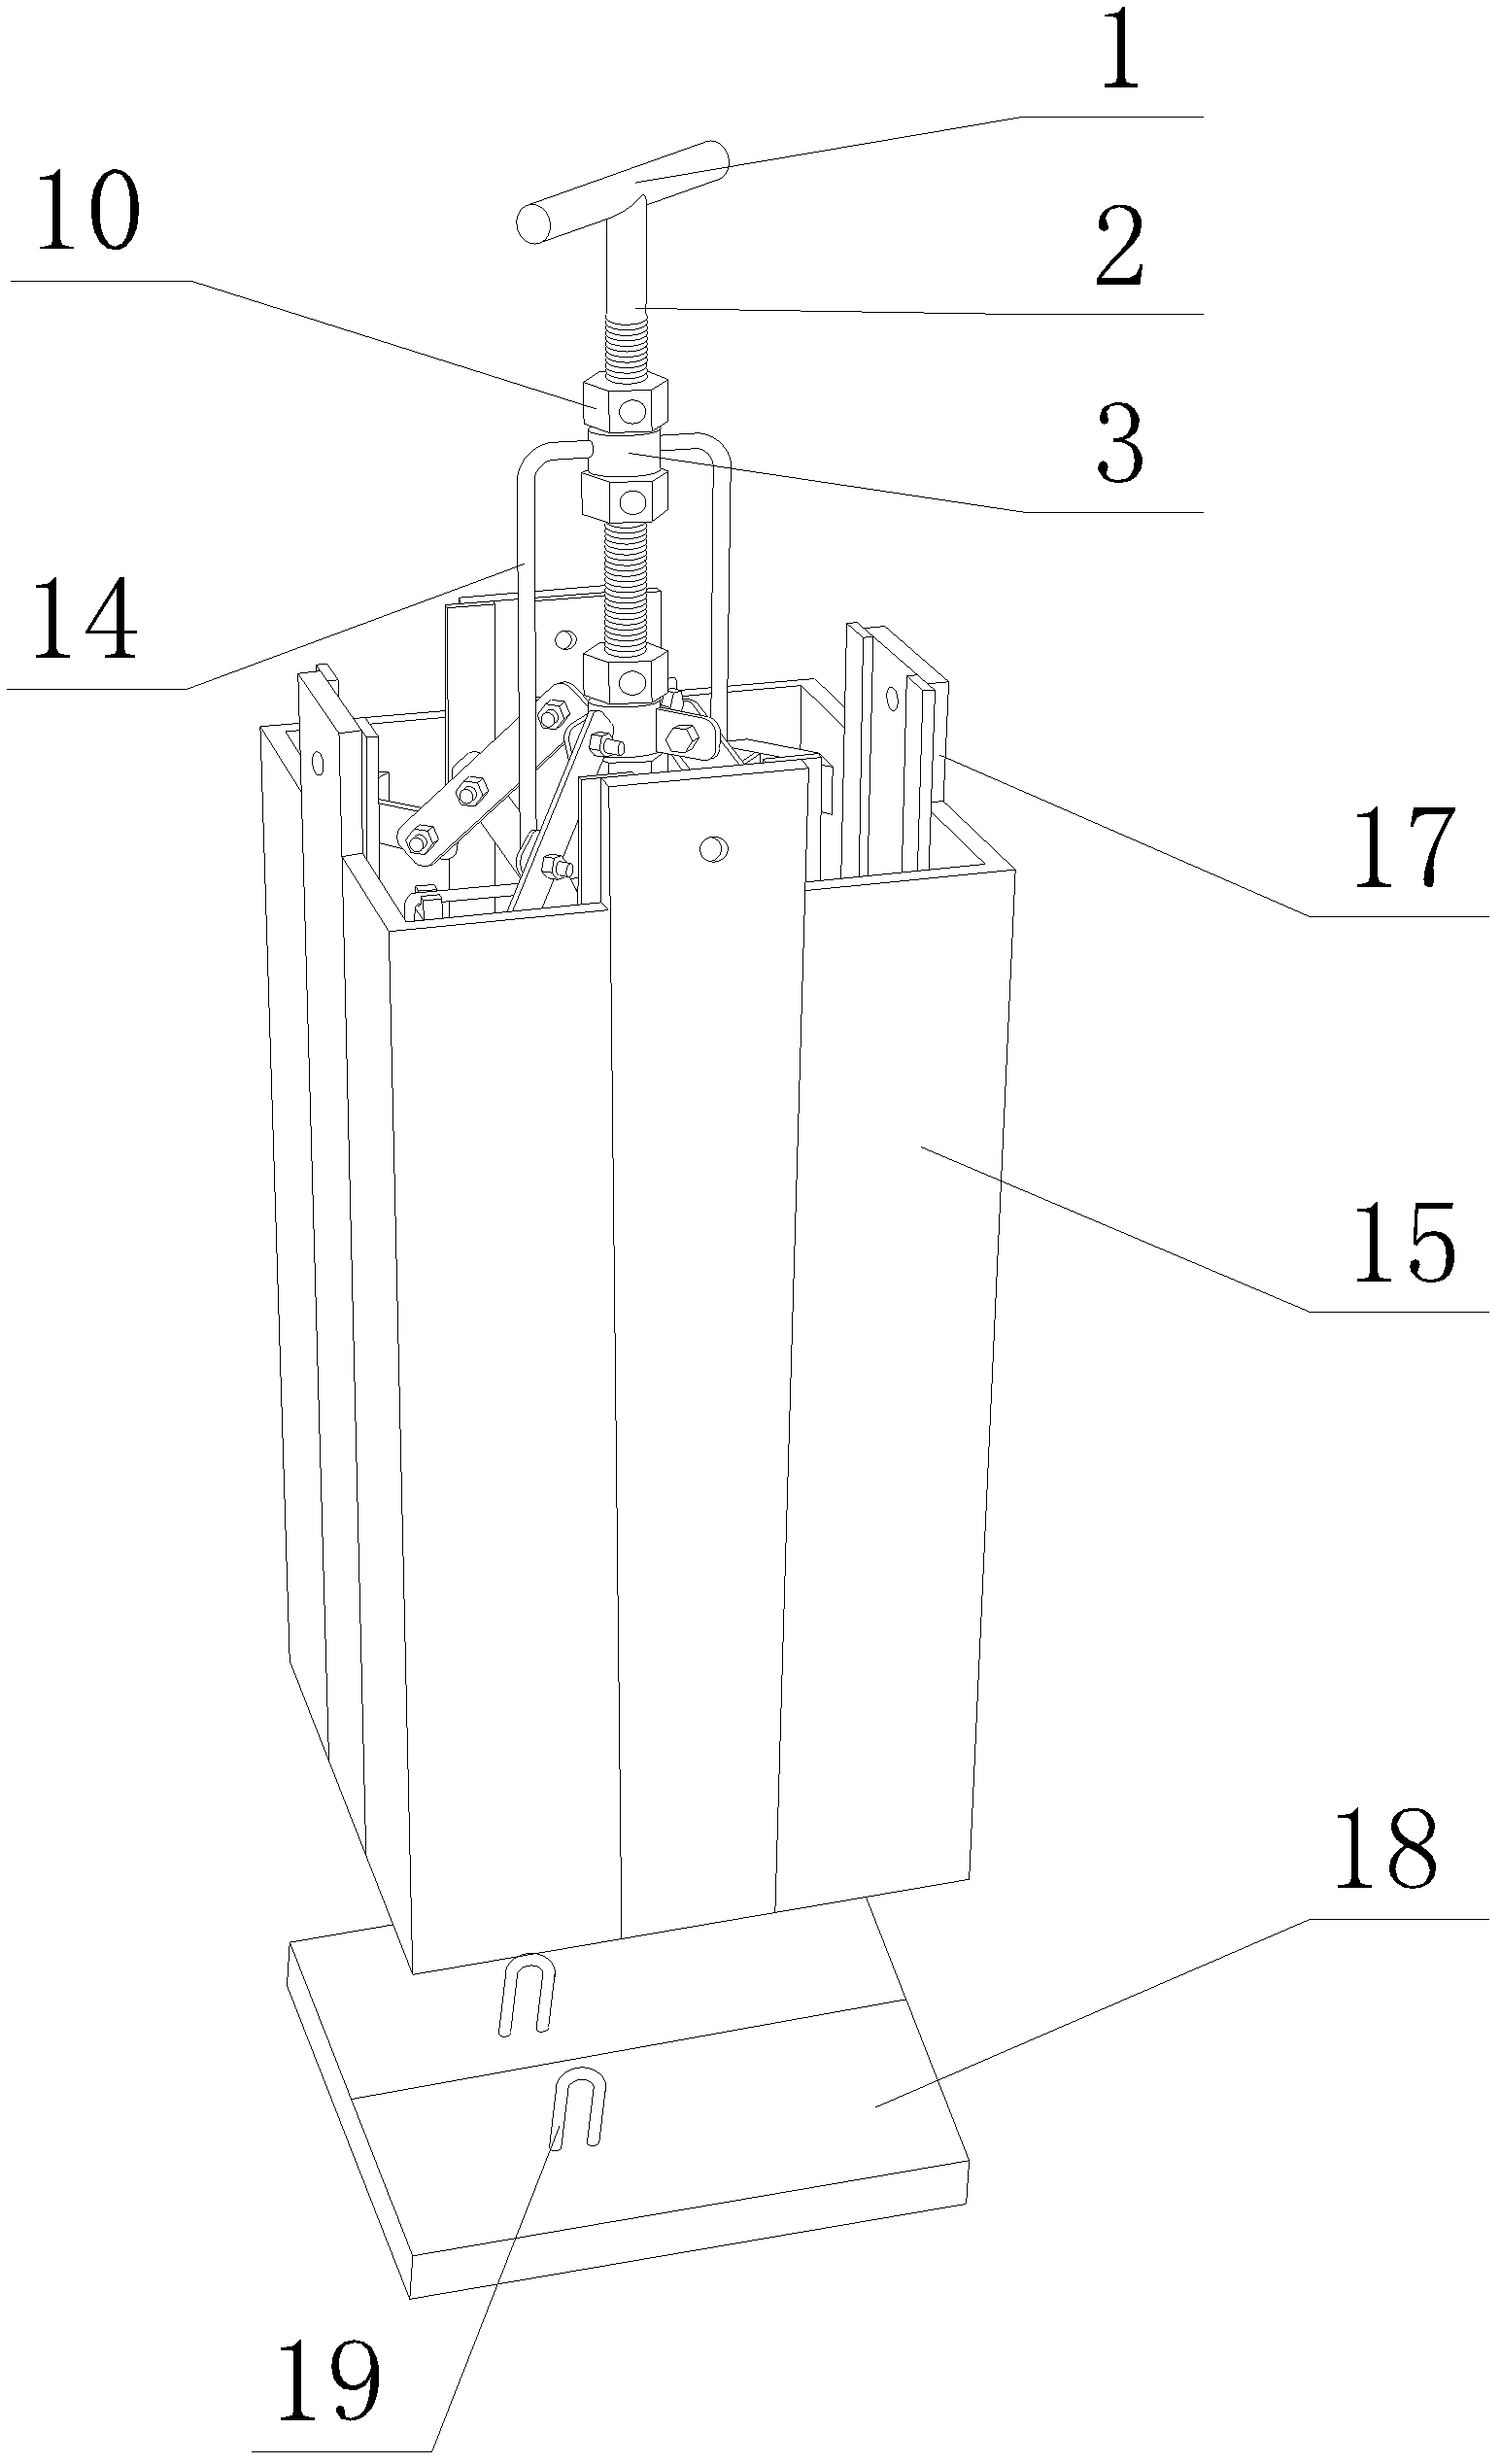 Construction method of equipment base pre-reservation anchor bolt square hole